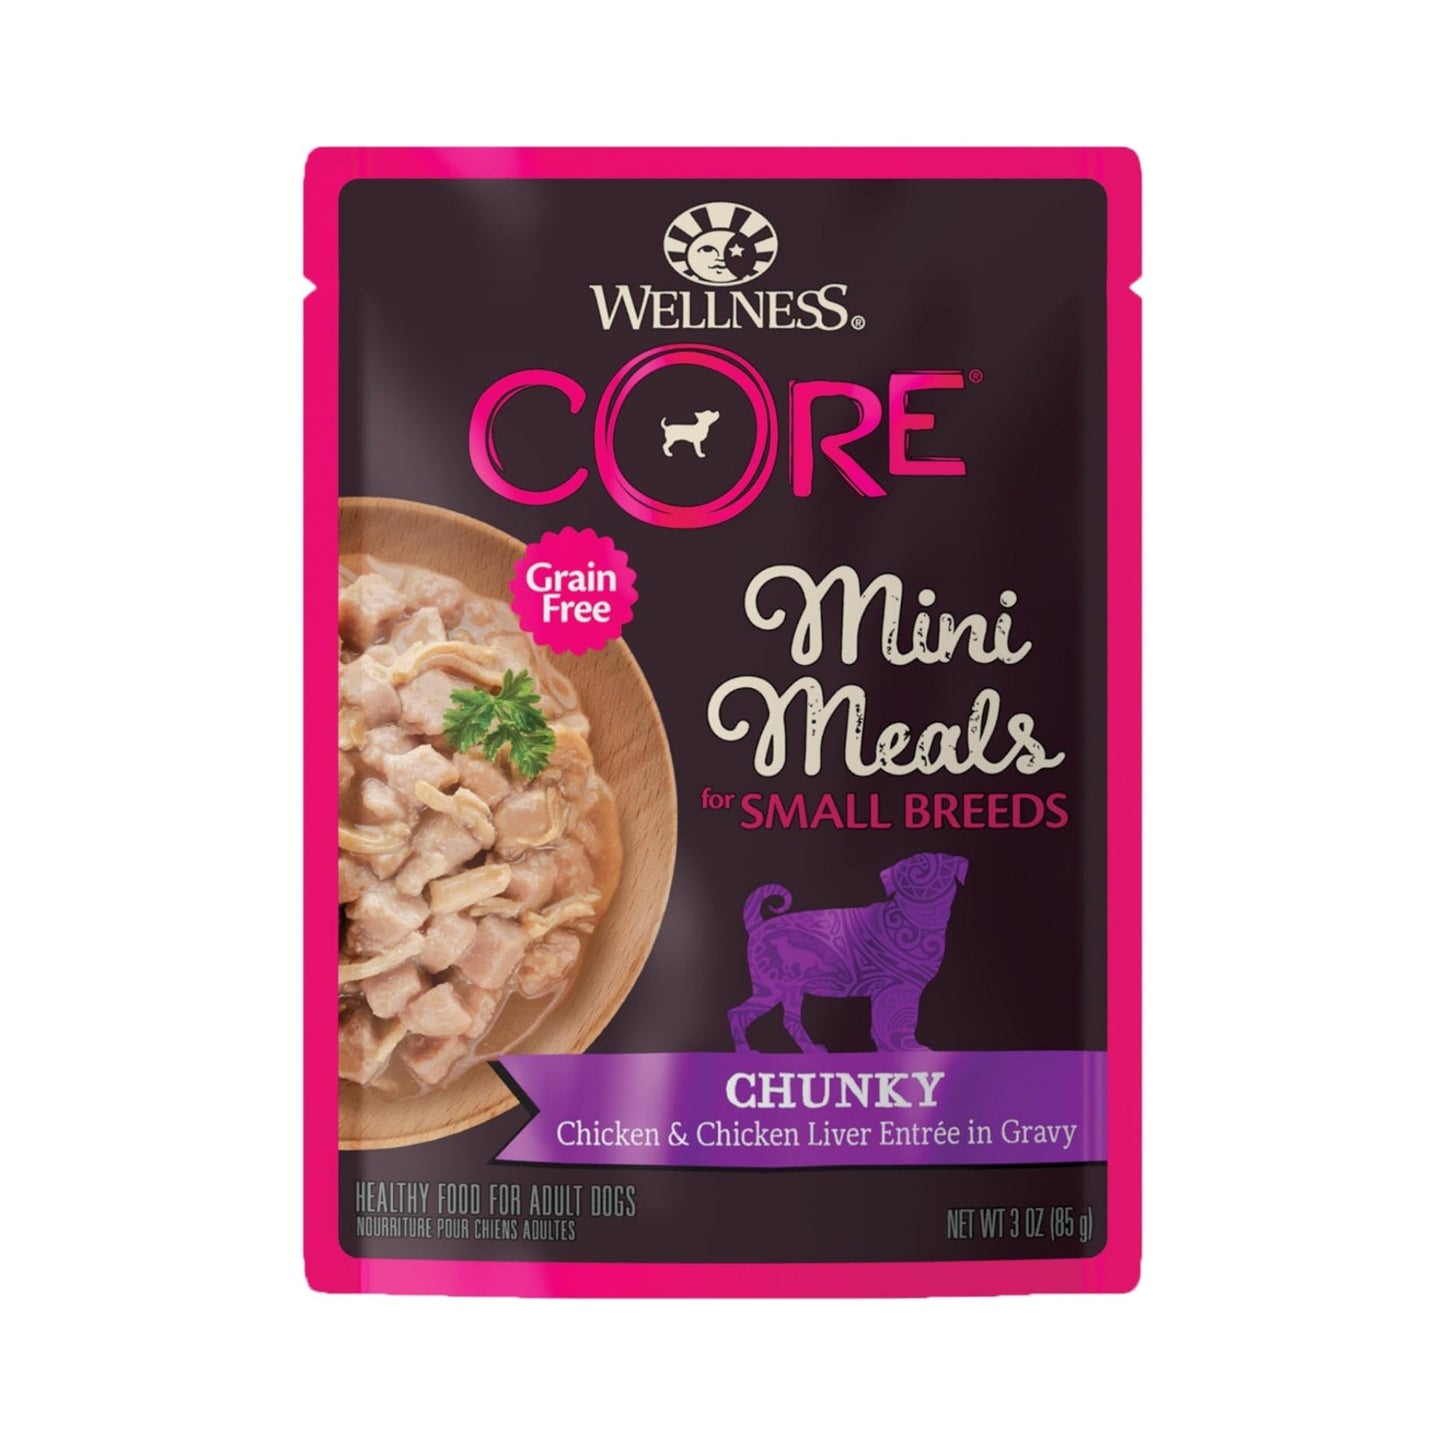 Wellness Core Small Breed Mini Meal Chunk Chicken Chicken Liver Entree 3oz. (Case of 12)